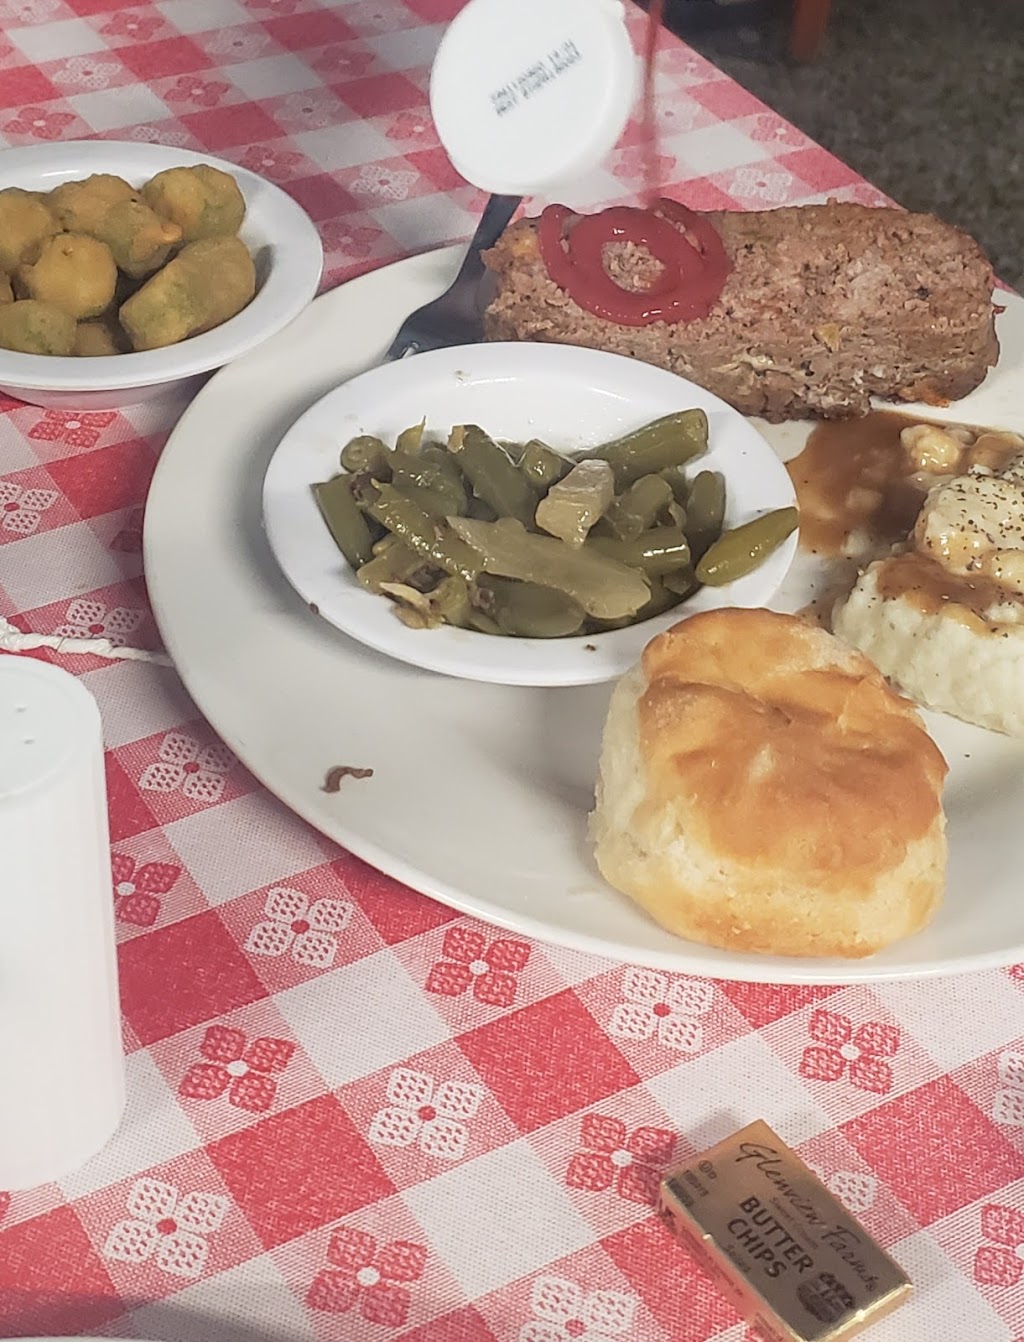 The Country Kitchen on Main | restaurant | 330 N Main St, Crossville, TN 38555, USA | 9313370042 OR +1 931-337-0042